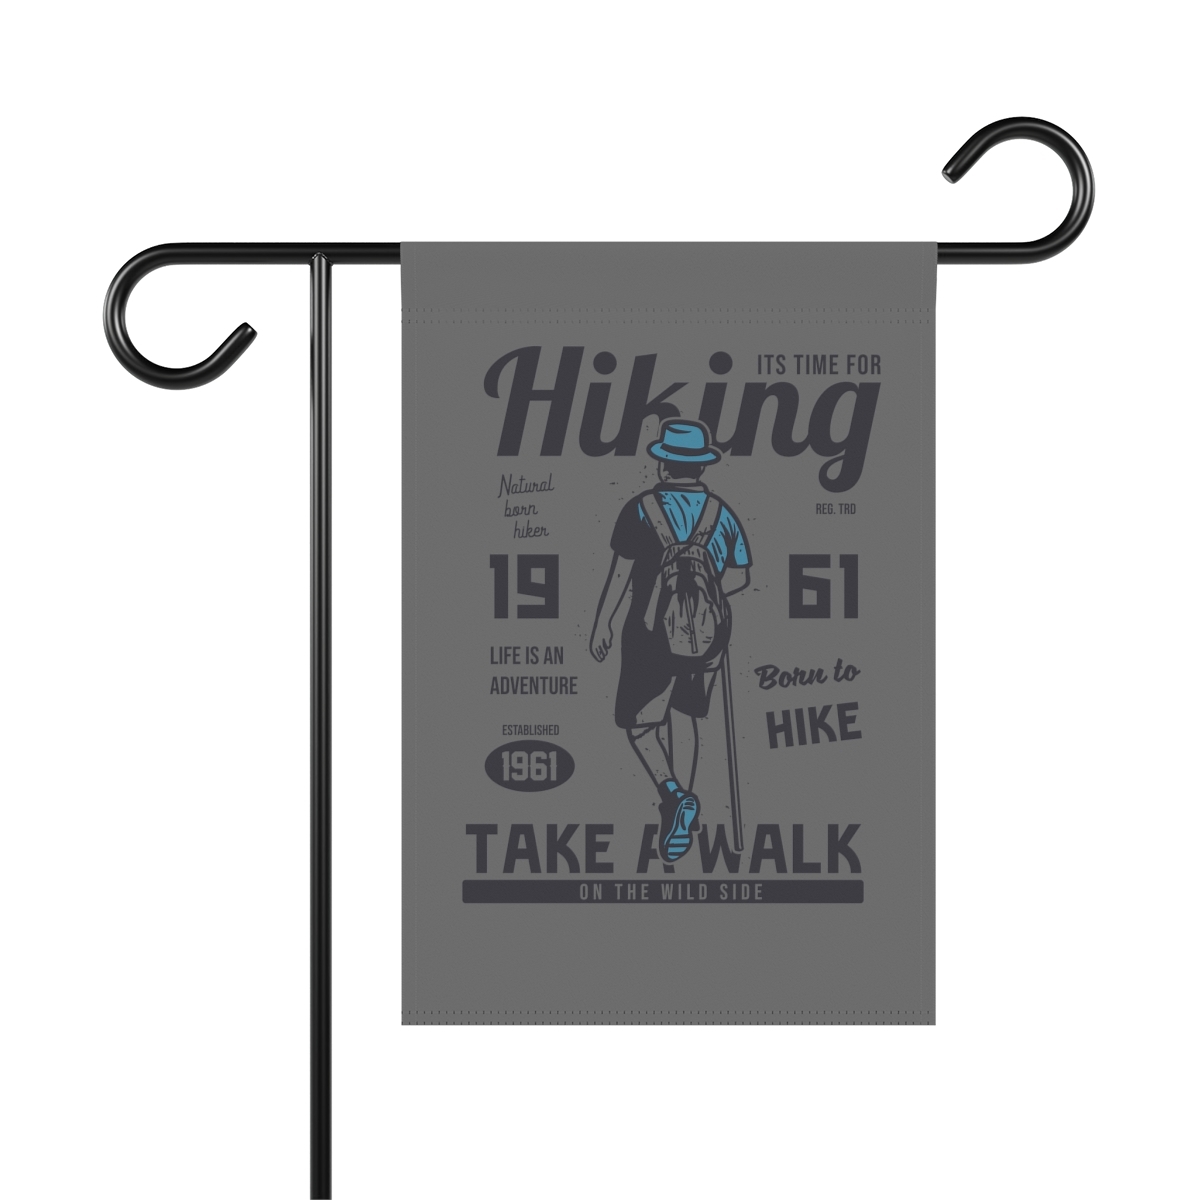 Personalized Garden & House Banner: Bold Adventure Motif, Hiking-Themed Print - $19.57 - $31.93